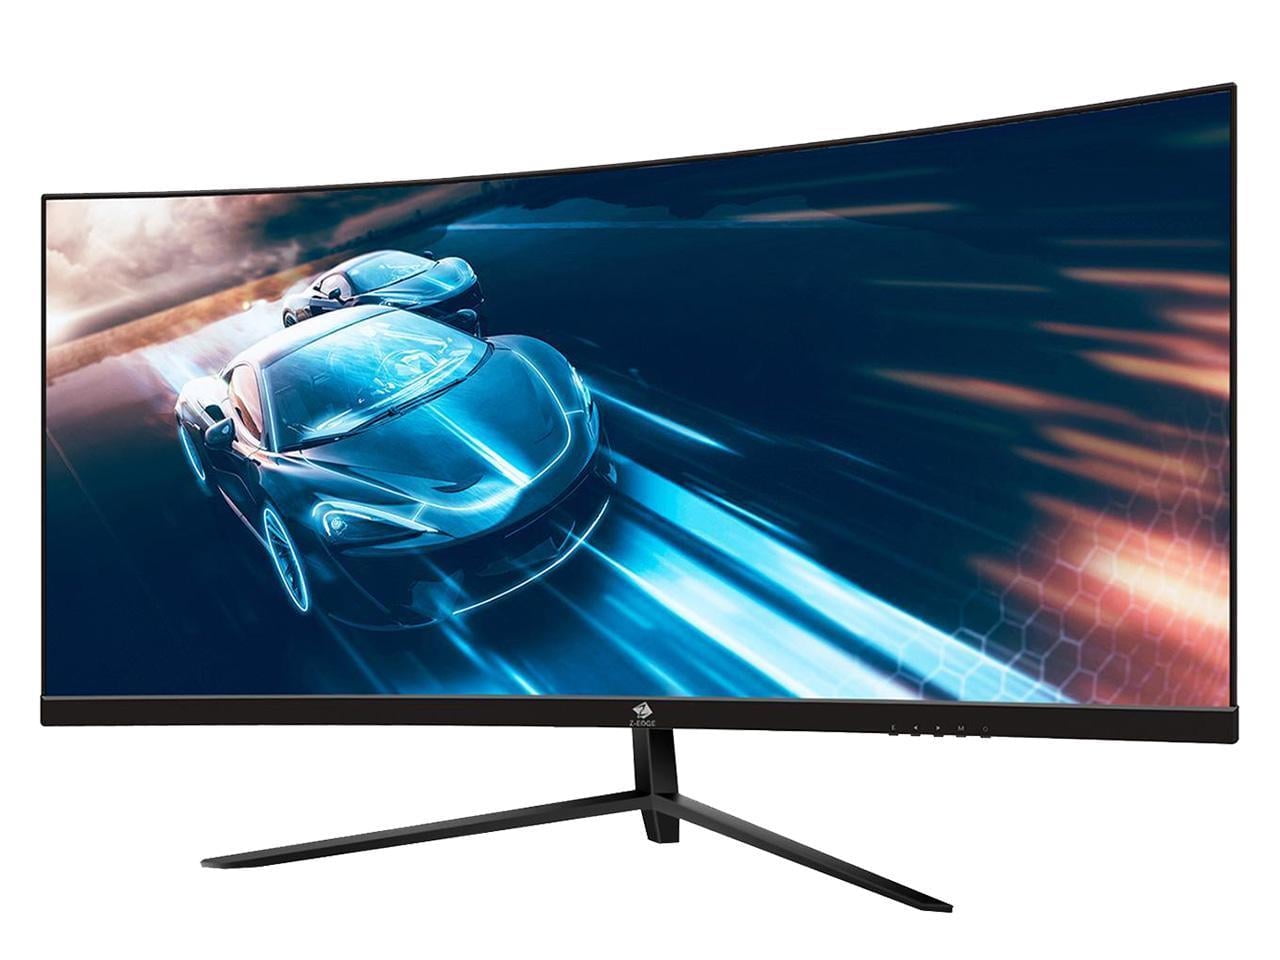 Pre-Owned Z-EDGE 30 inch Ultrawide Curved Gaming Monitor, 200Hz 1ms, FHD 2560x1080, HDR10, FreeSync, 2 x HDMI, 2 x DisplayPort,1 x USB, Built-in Speakers, Black